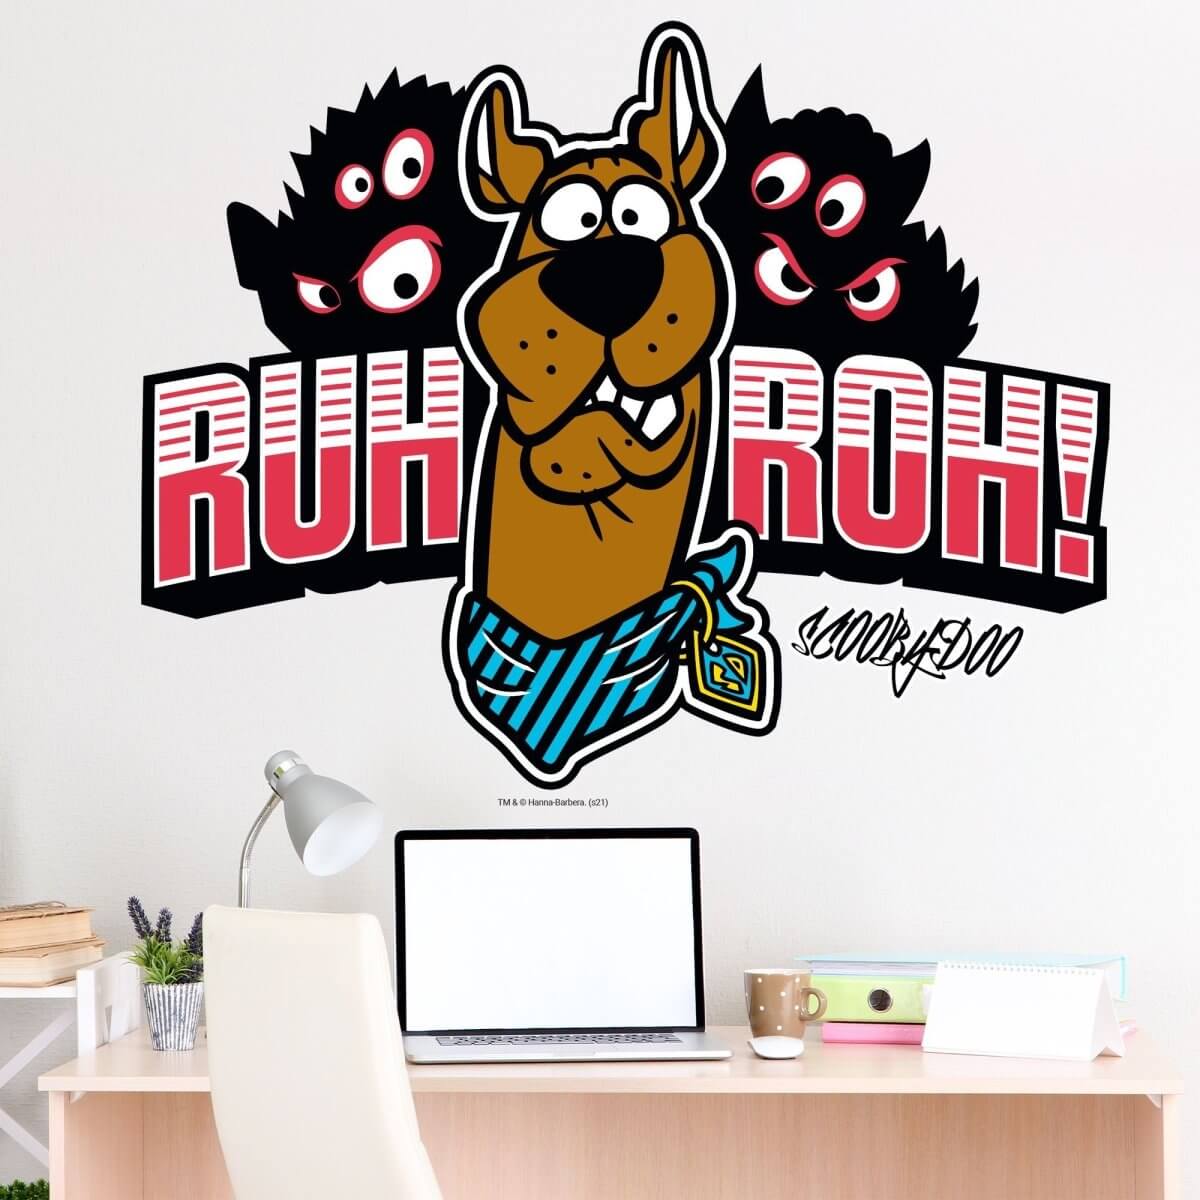 Kismet Decals Home & Room Decor Scooby-Doo Ruh-Roh! Wall decal sticker - officially licensed - latex printed with no solvent odor - Kismet Decals